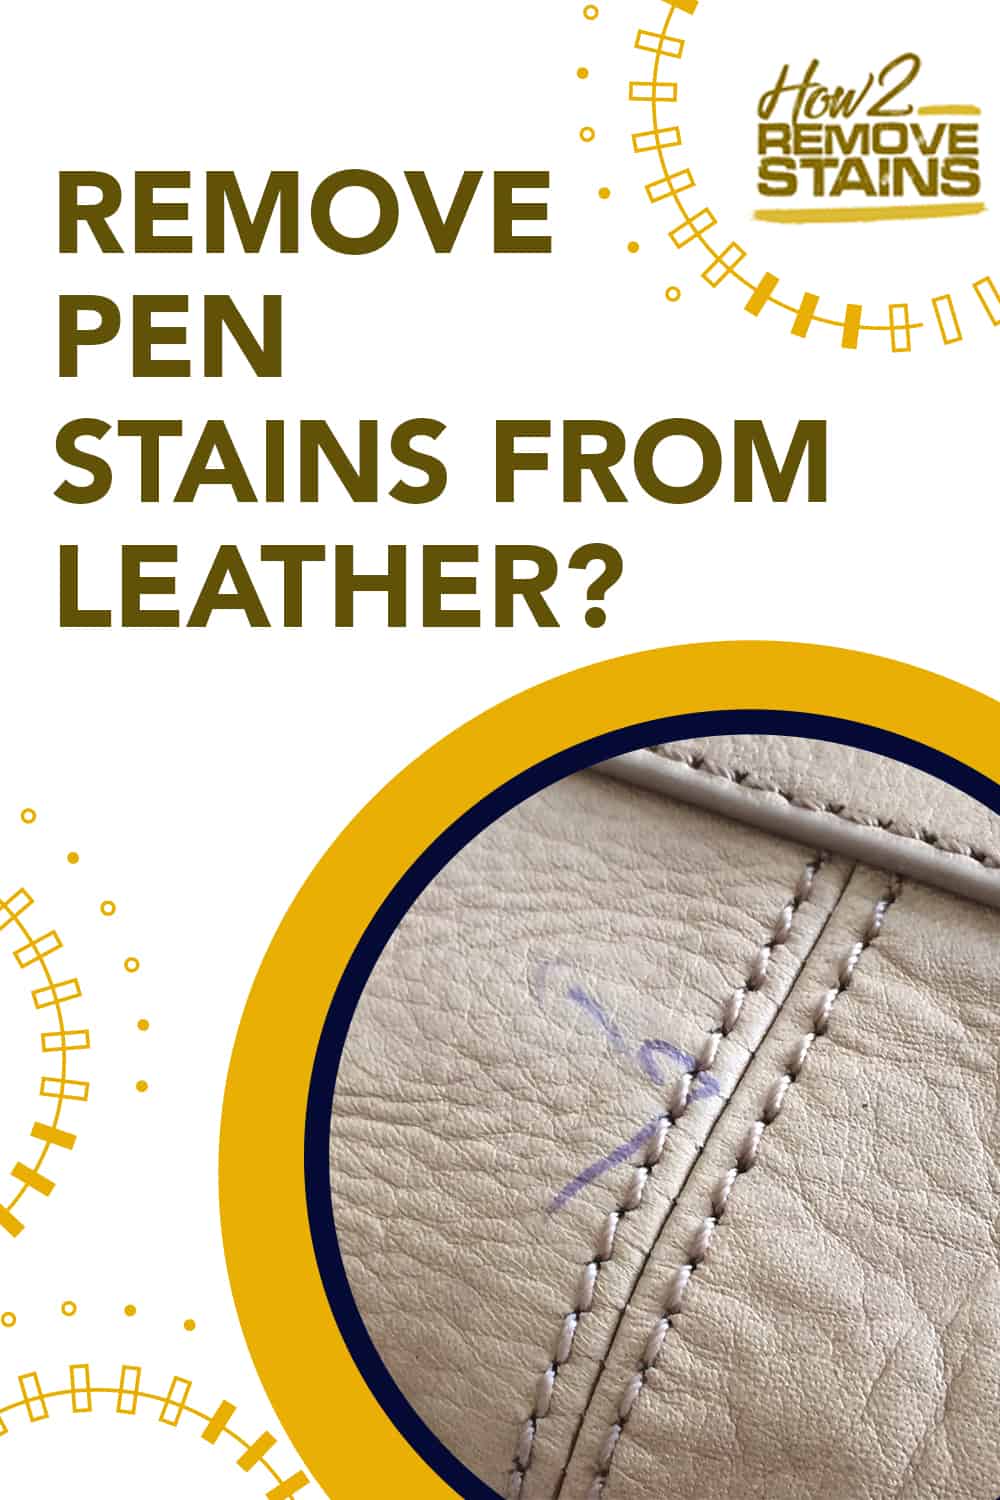 How to remove pen stains from leather [ Detailed Answer ]